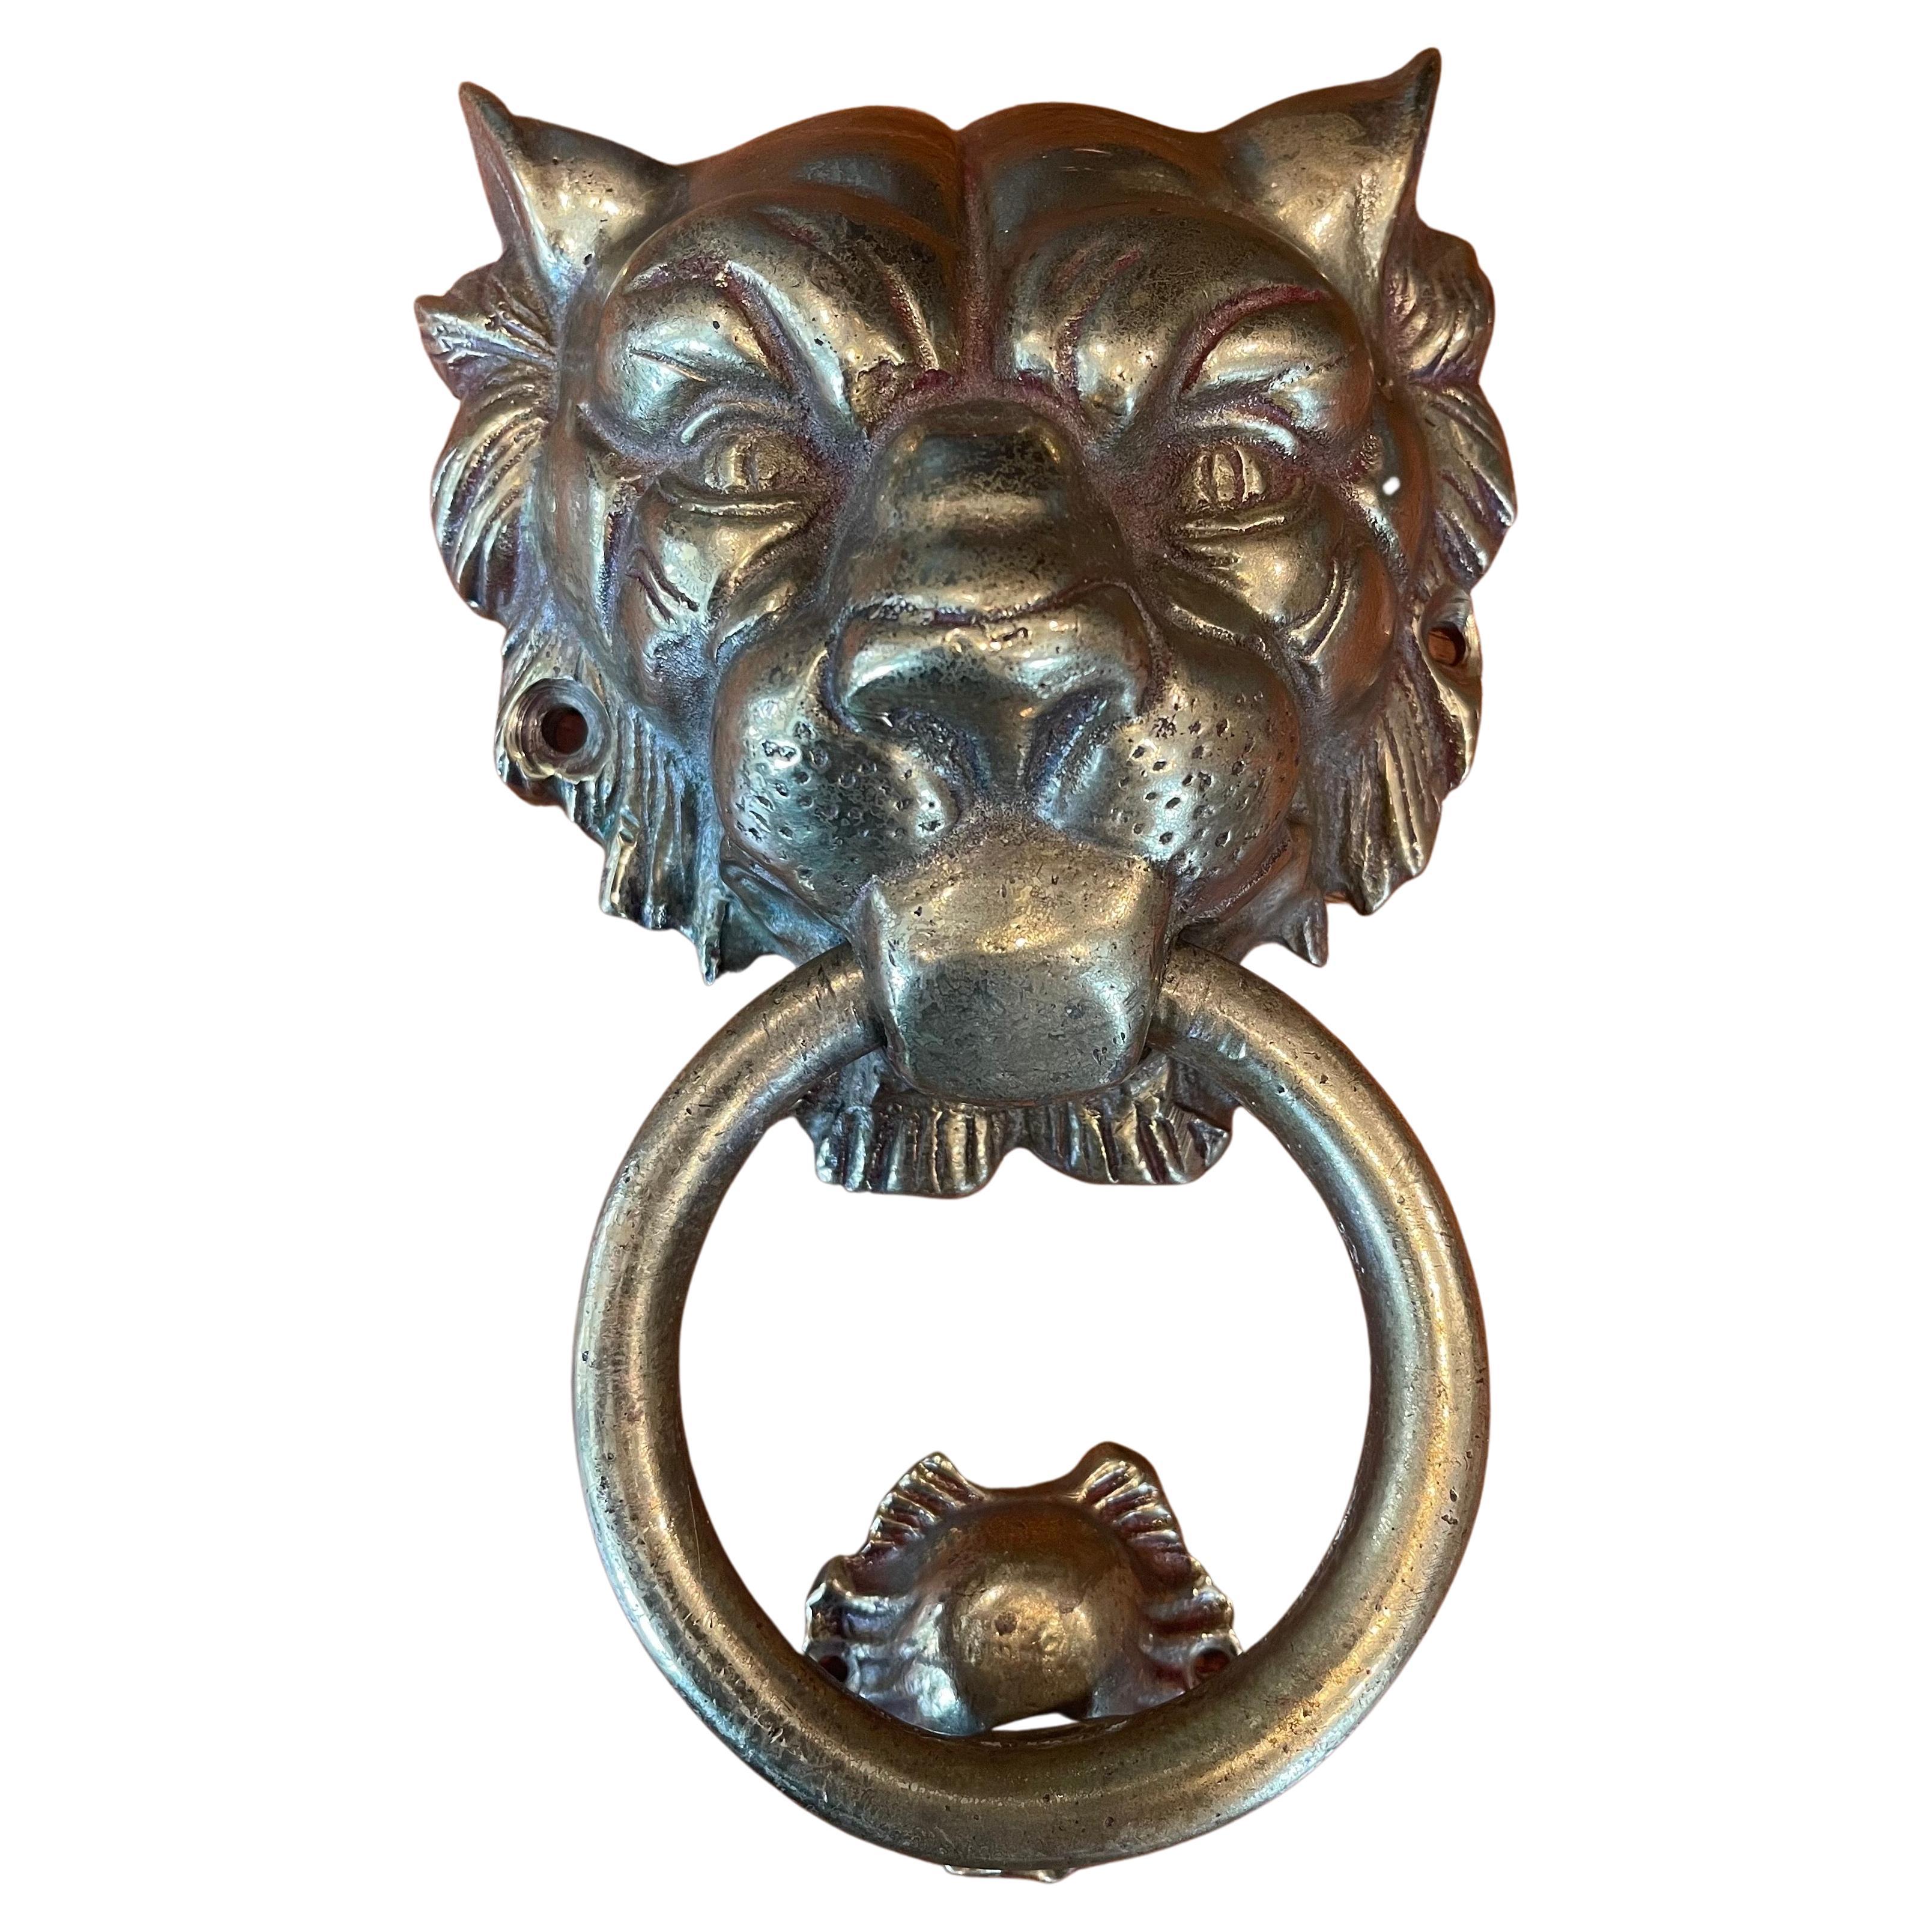 Well worn vintage brass lion head door knocker, circa 1970s. The piece is made of cast brass and is quite heavy. The knocker is in very good vintage condition and measures 6